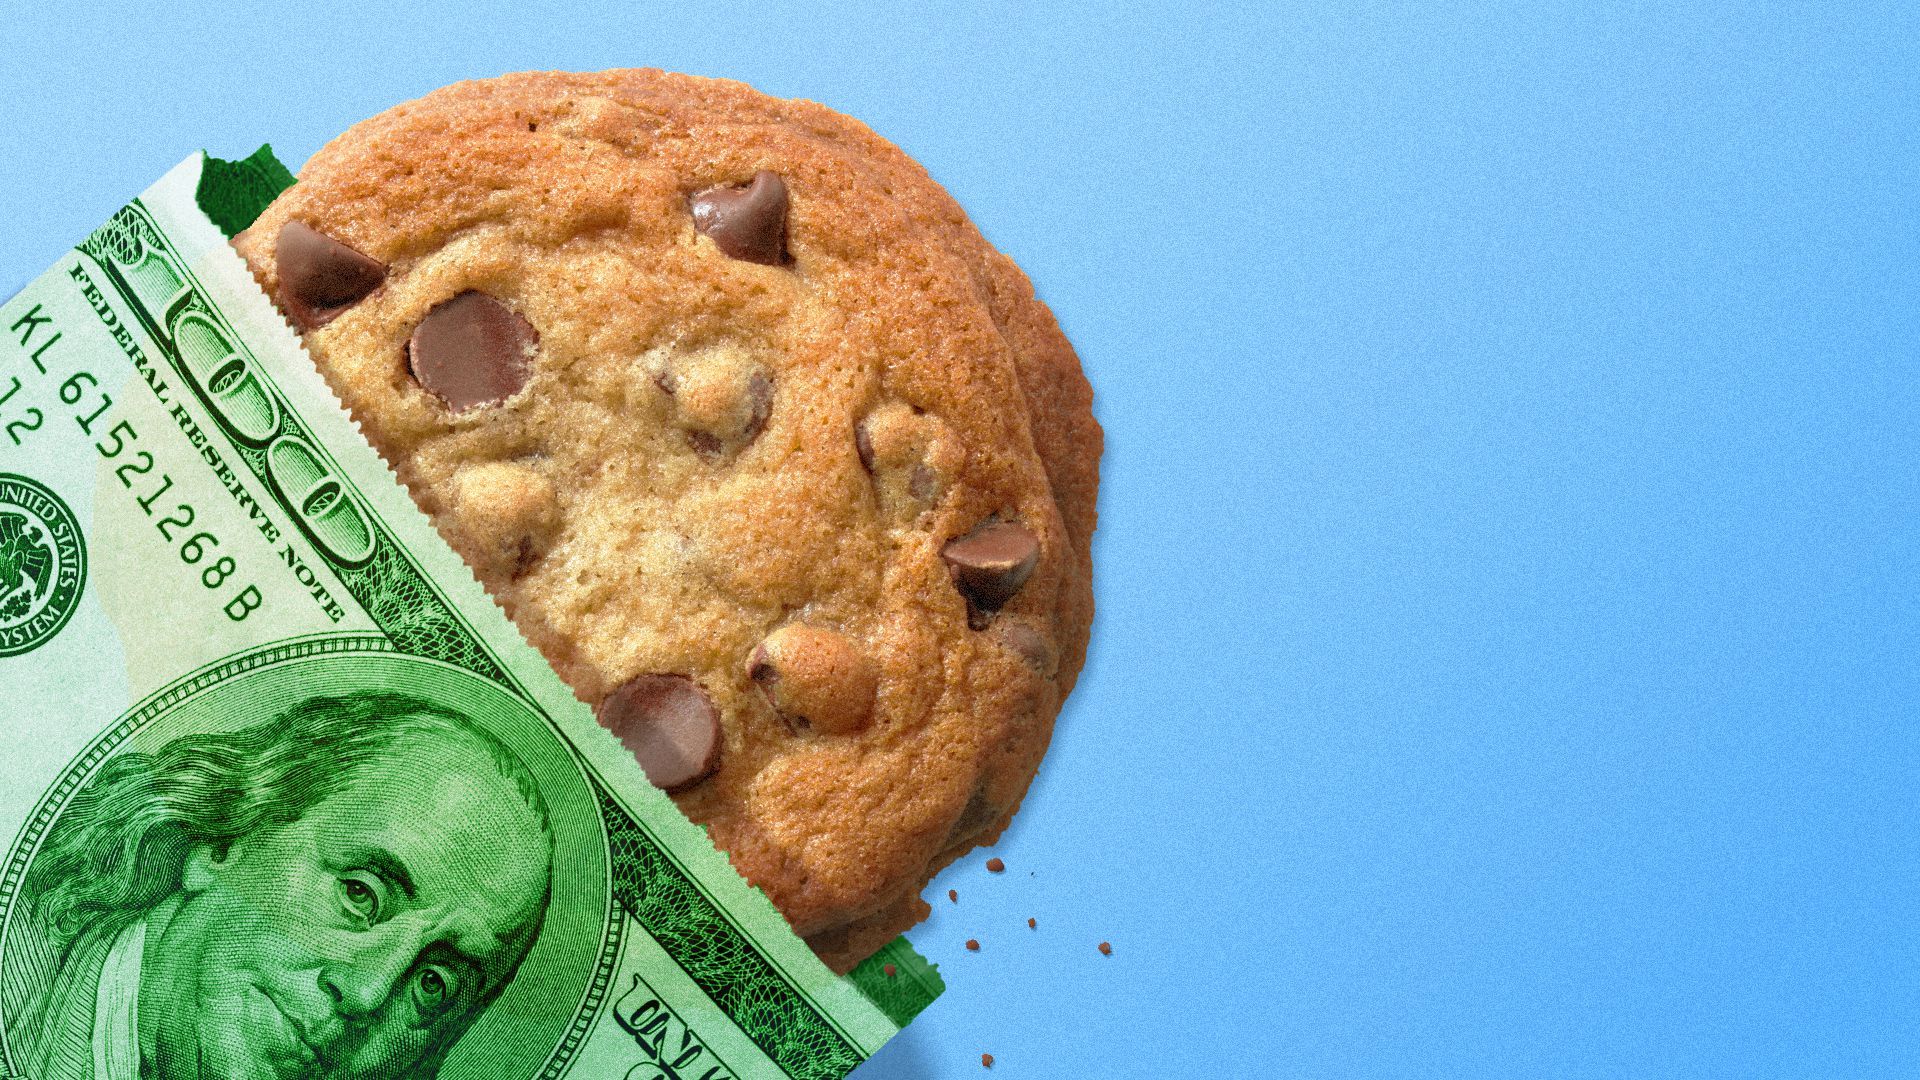 Illustration of a cookie in a paper wrapper made from a $100 bill.